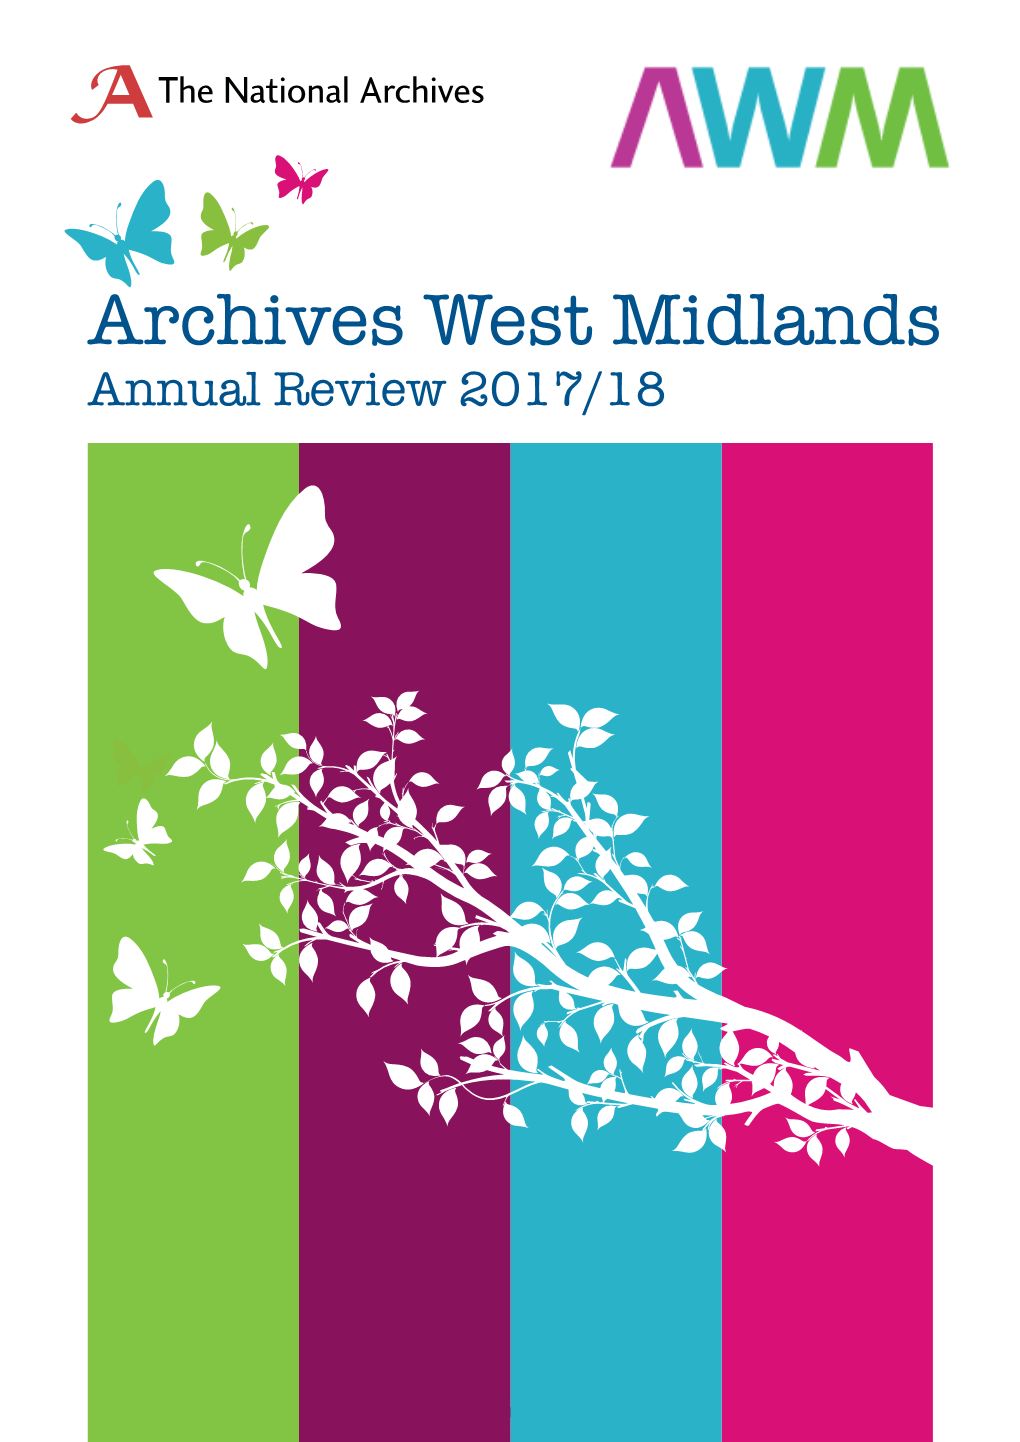 Archives West Midlands Annual Review 2017/18